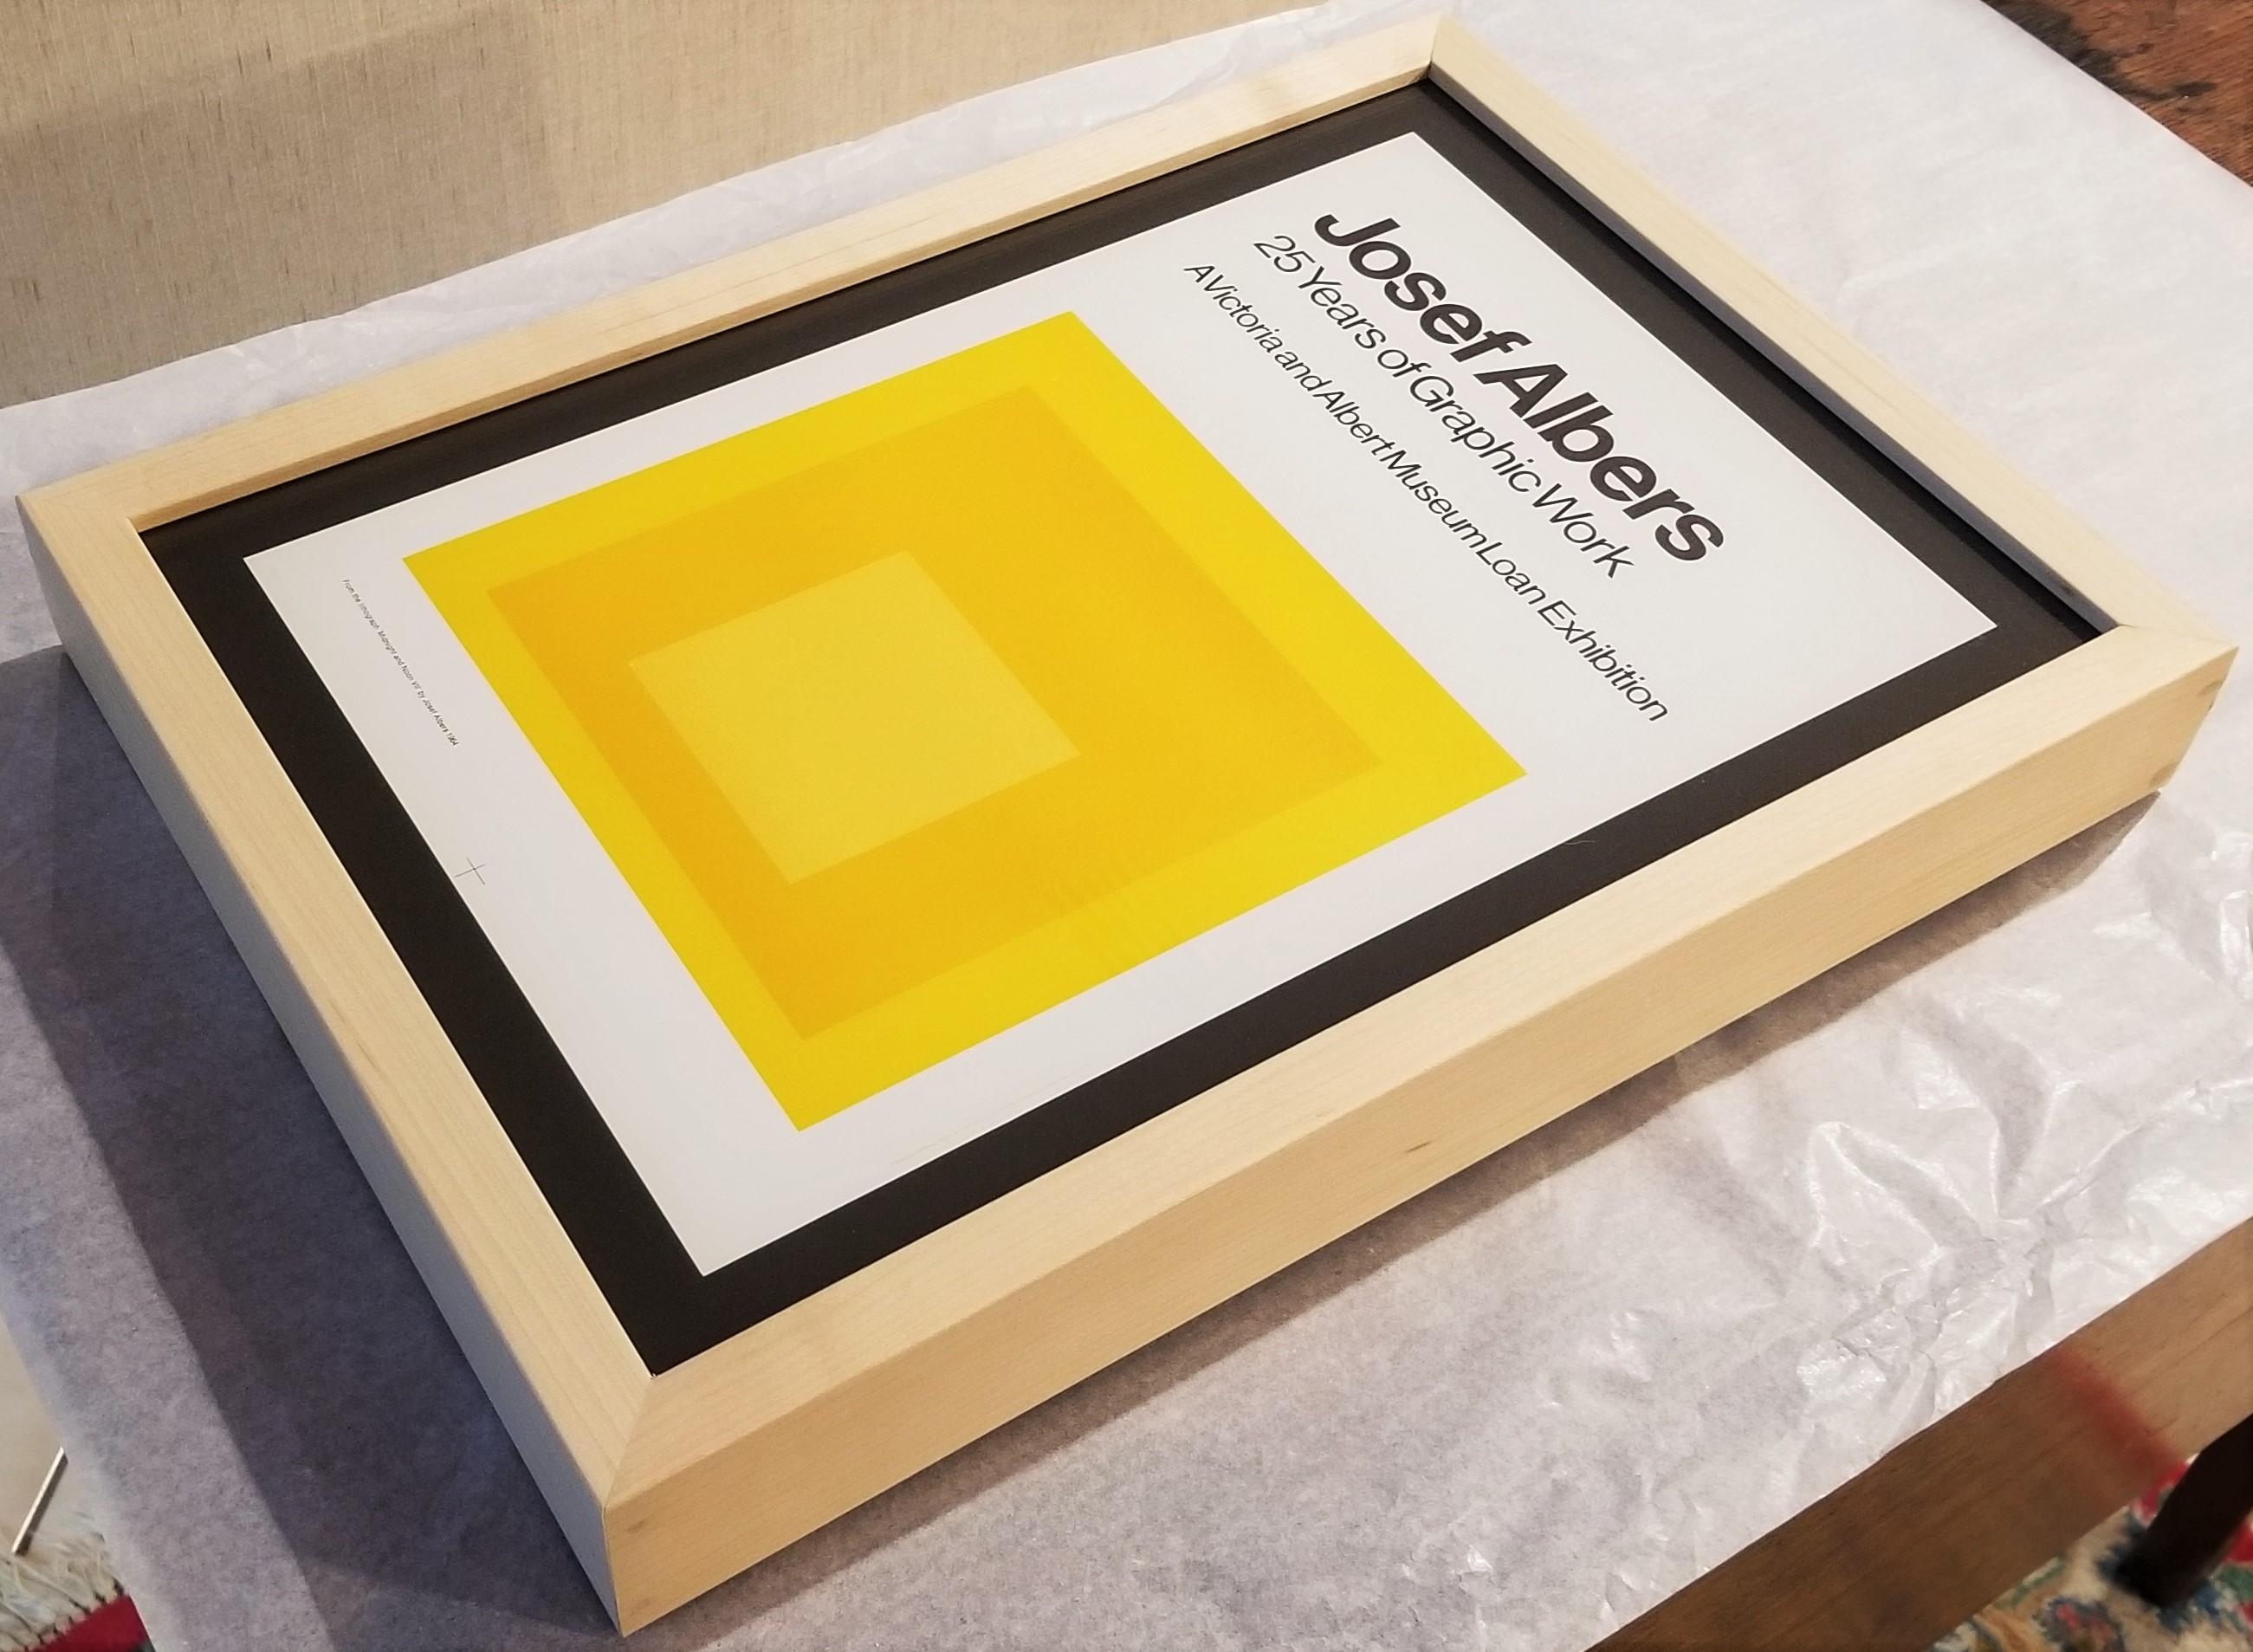 Josef Albers : 25 Years of Graphic Work (Midnight and Noon VII) Poster /// Square en vente 18